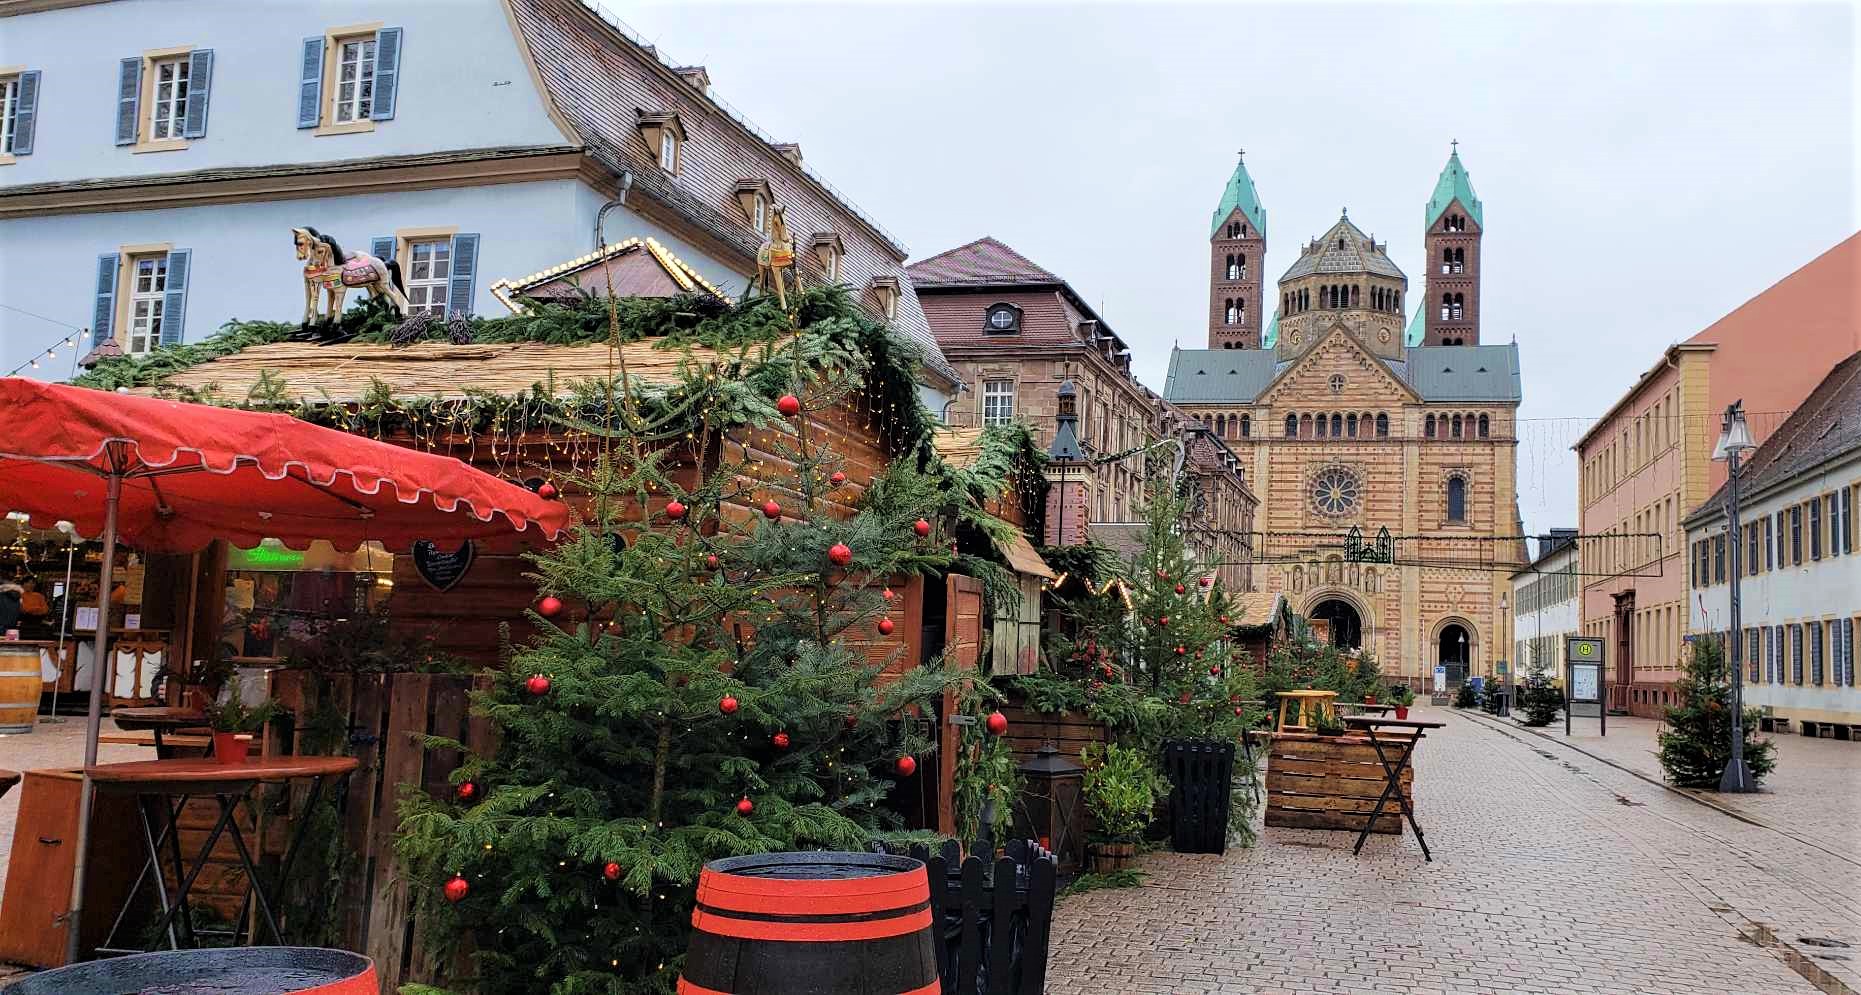 AmaWaterways operates many Christmas Markets cruises. Here's the market at Speyer, Germany. Photo by Susan J. Young